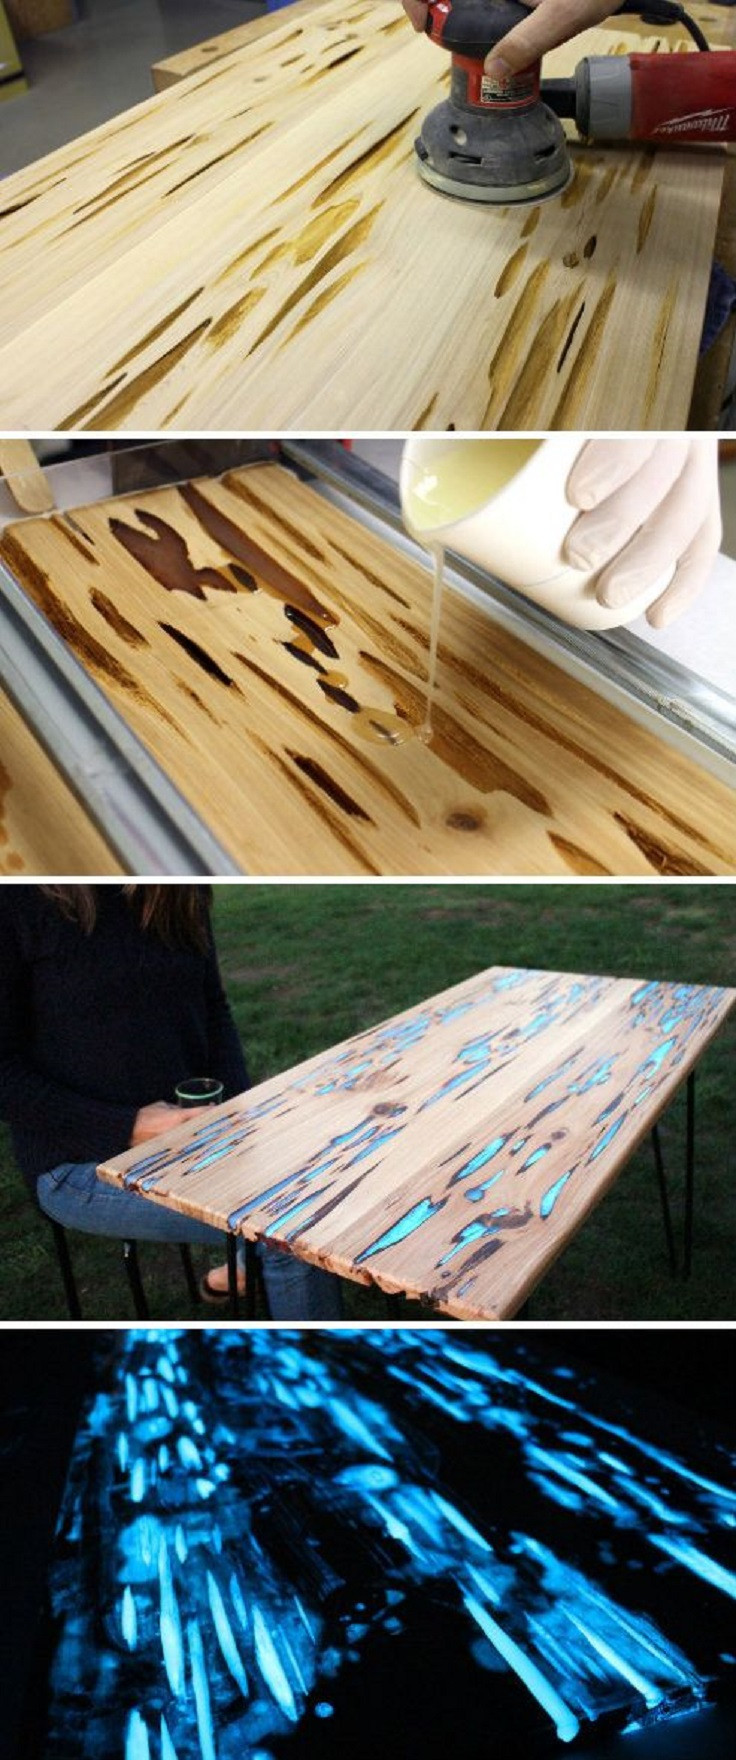 DIY Wood Working Projects
 Top 10 Creative DIY Woodwork Projects Top Inspired